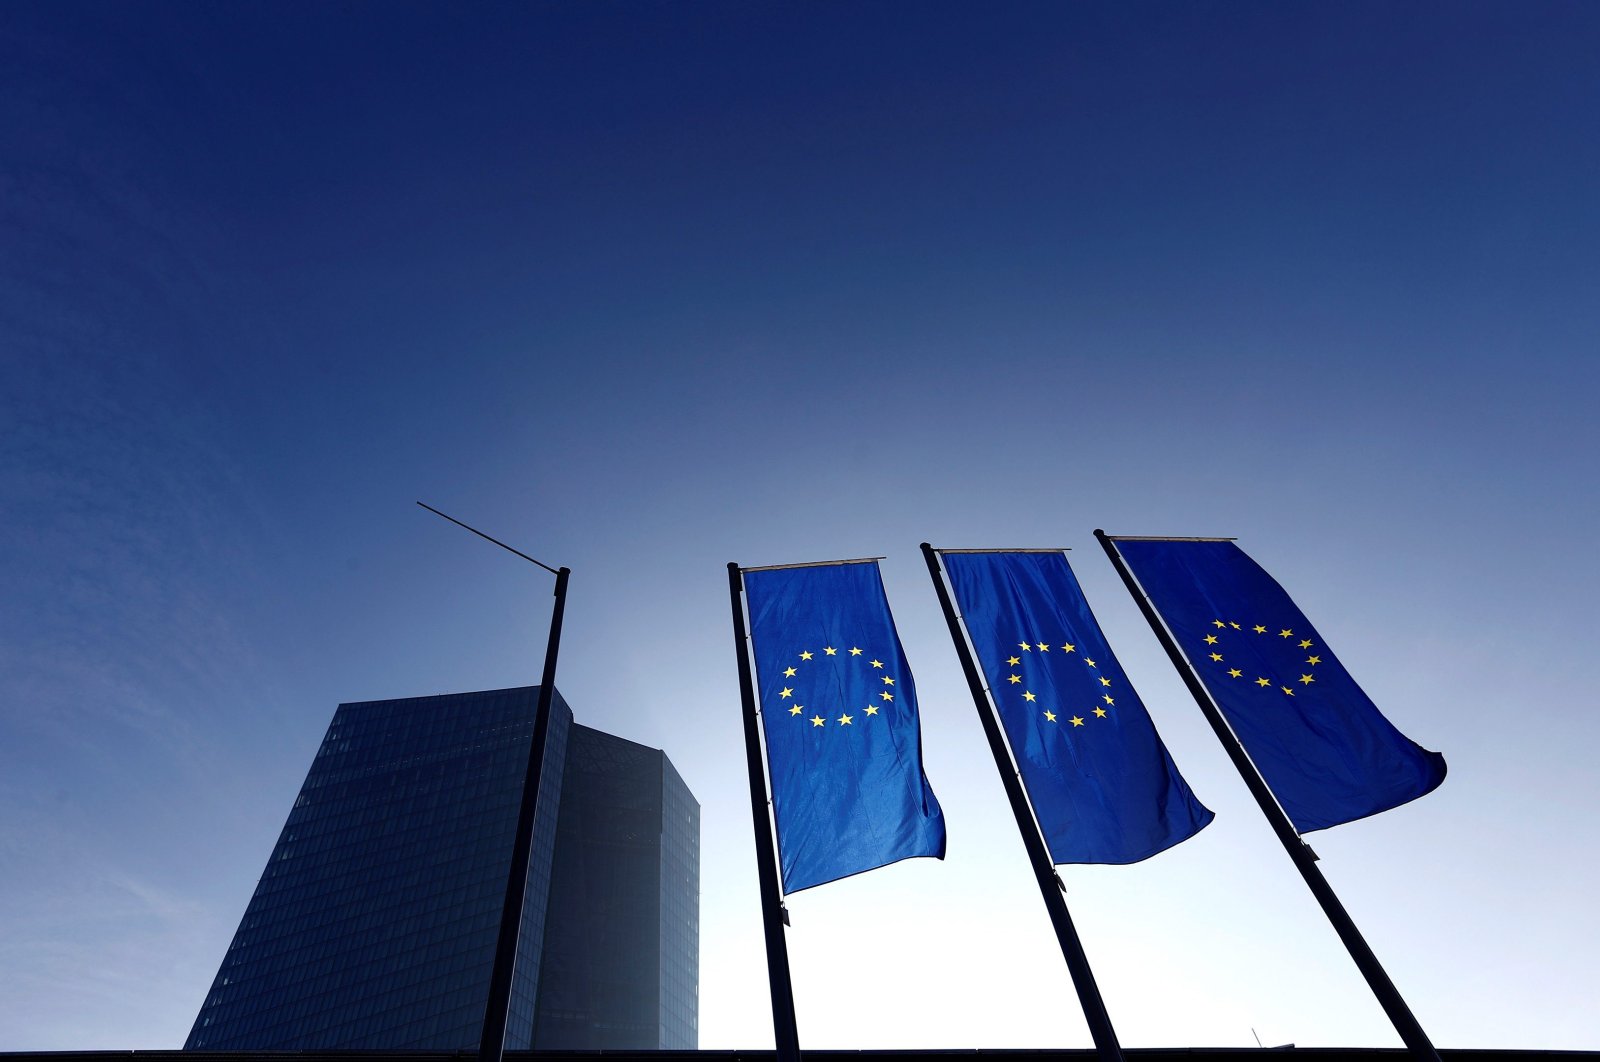 This undated photo shows EU flags outside the European Central Bank (ECB) headquarters, Frankfurt, Germany. (REUTERS Photo)